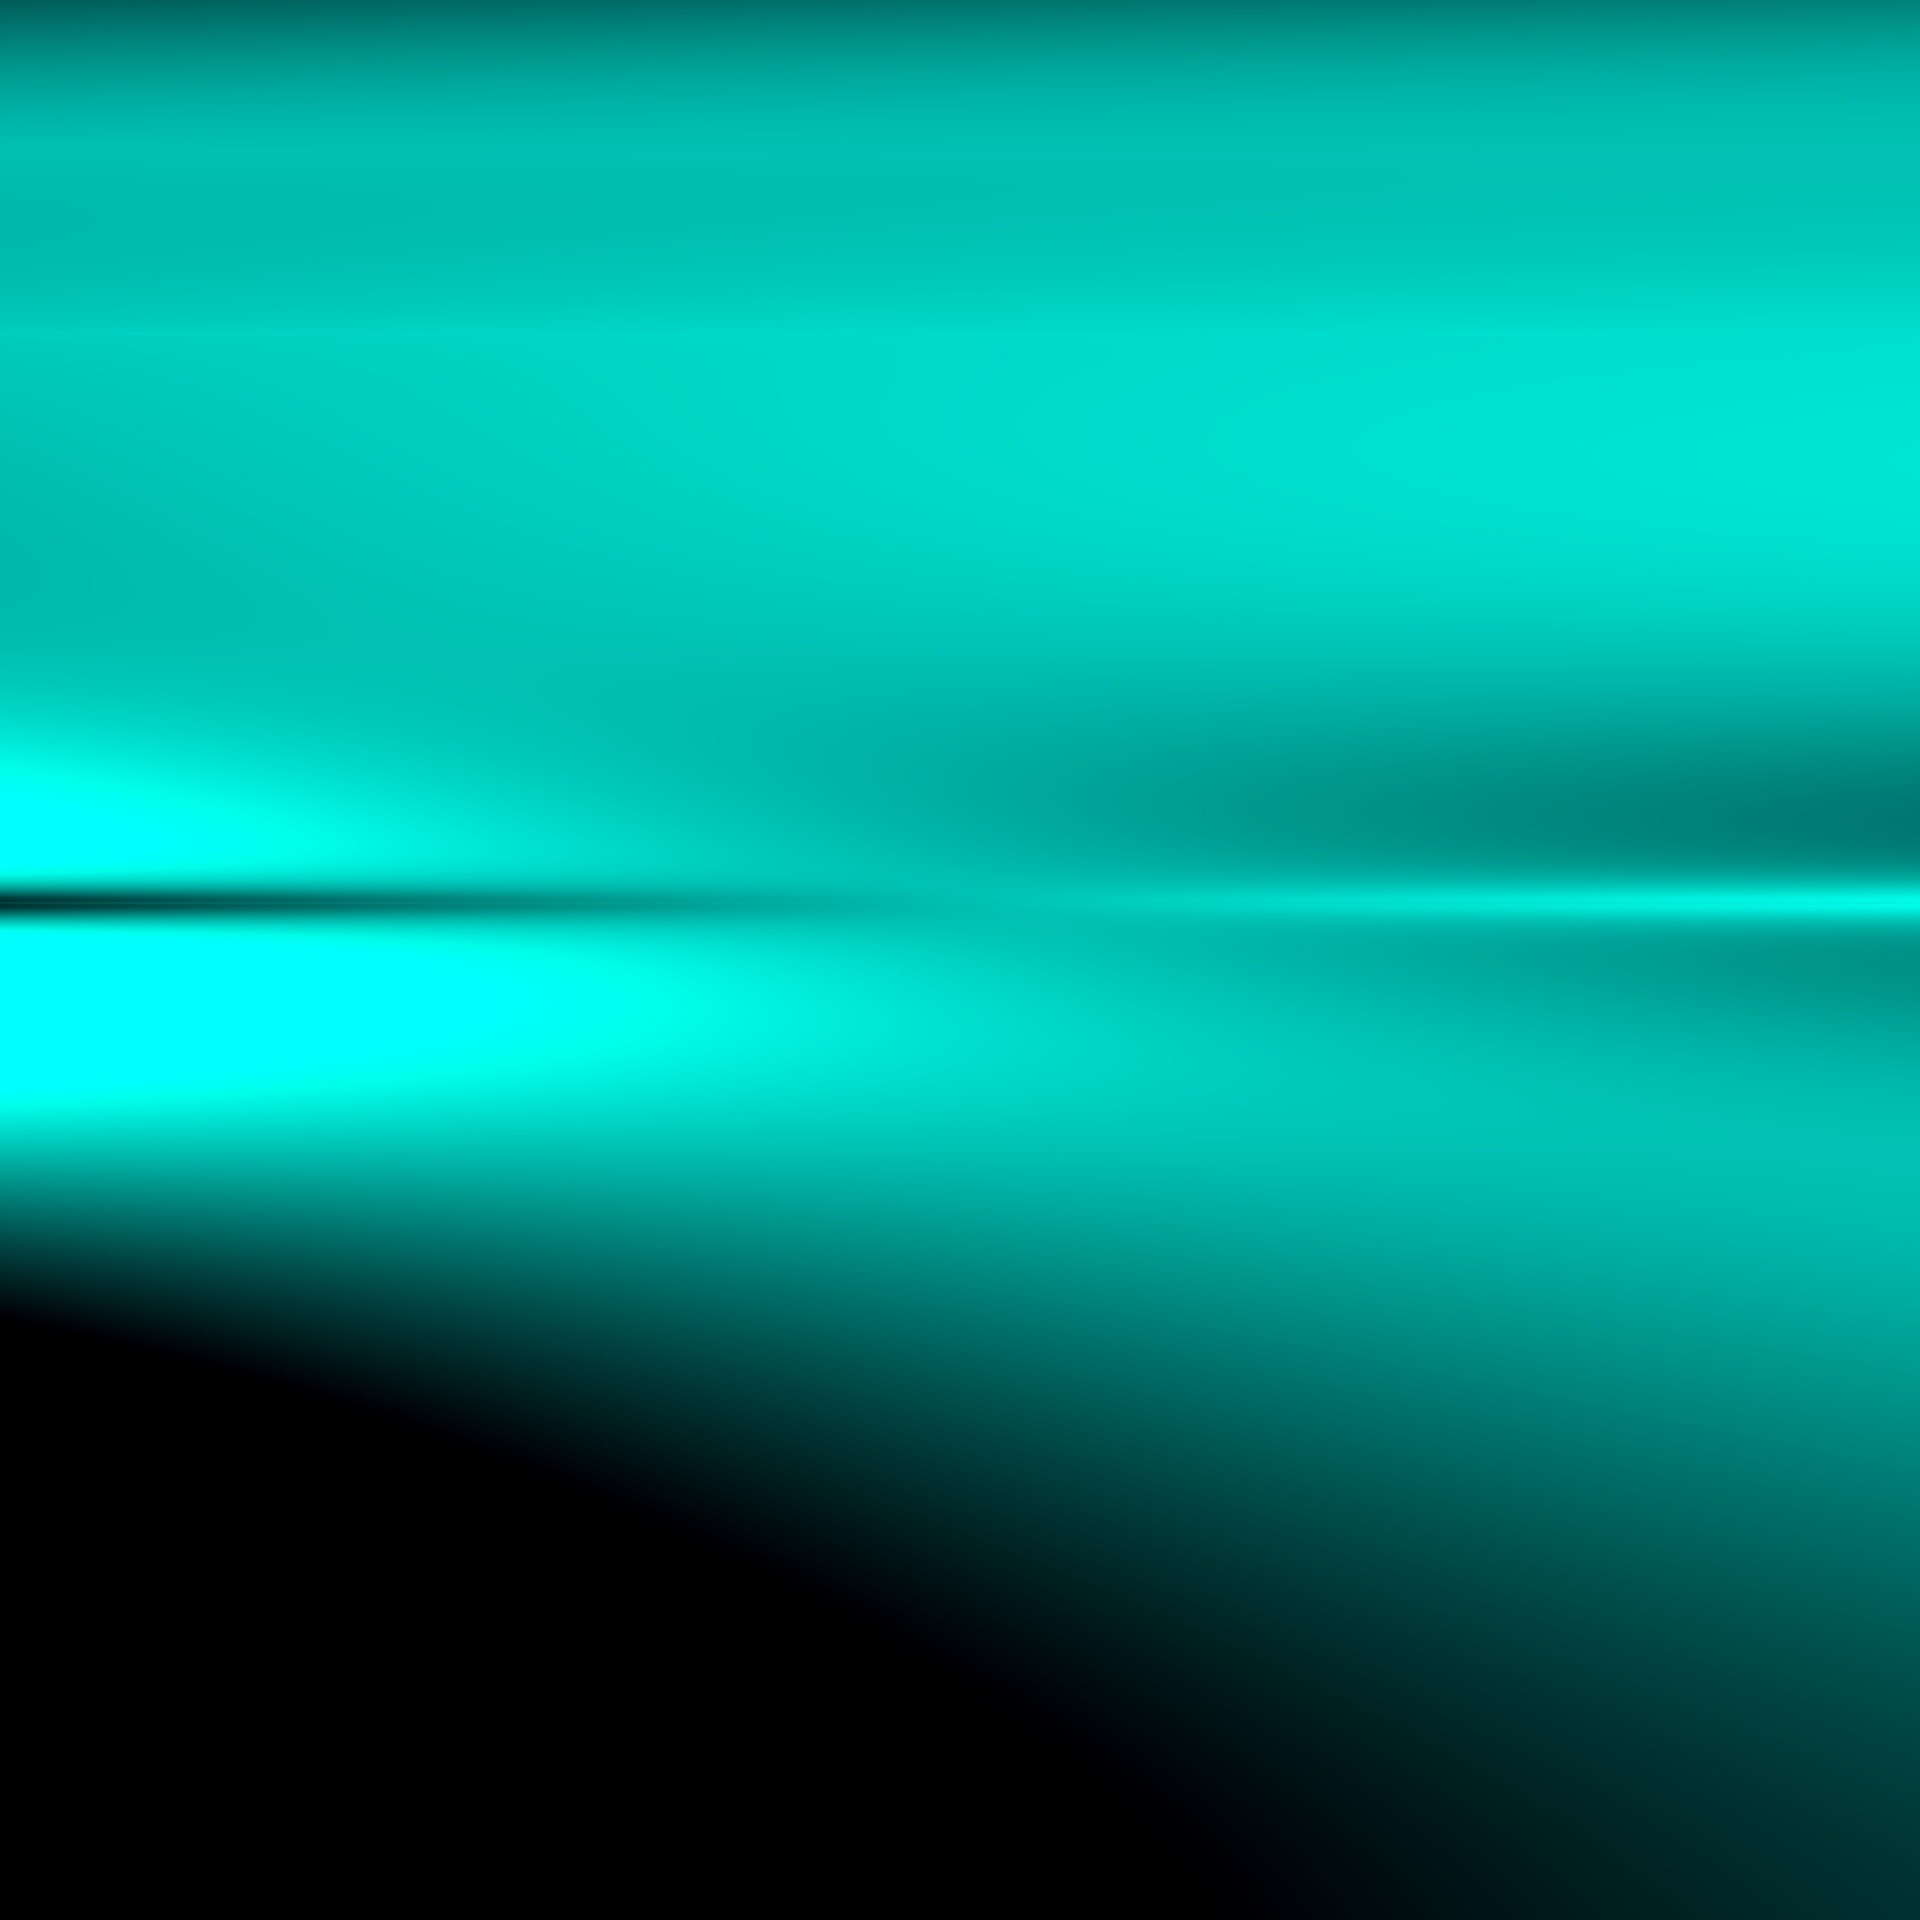 1920x1920 green,black,gradient,wallpaper,background,color,art,abstract,